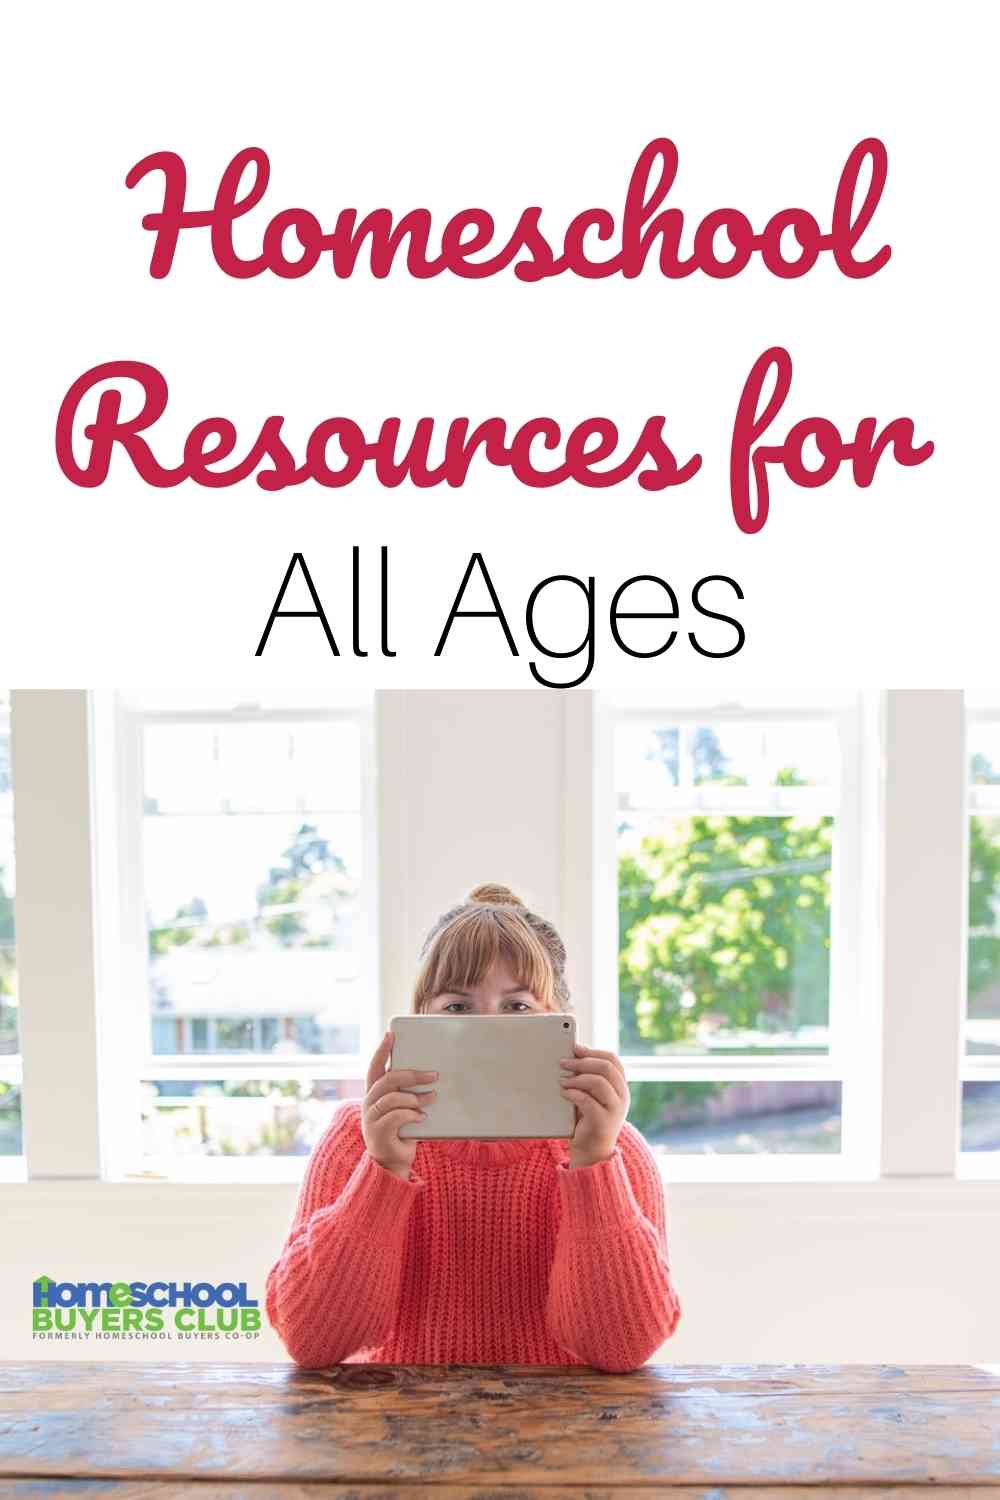 Homeschool resources for all ages we love